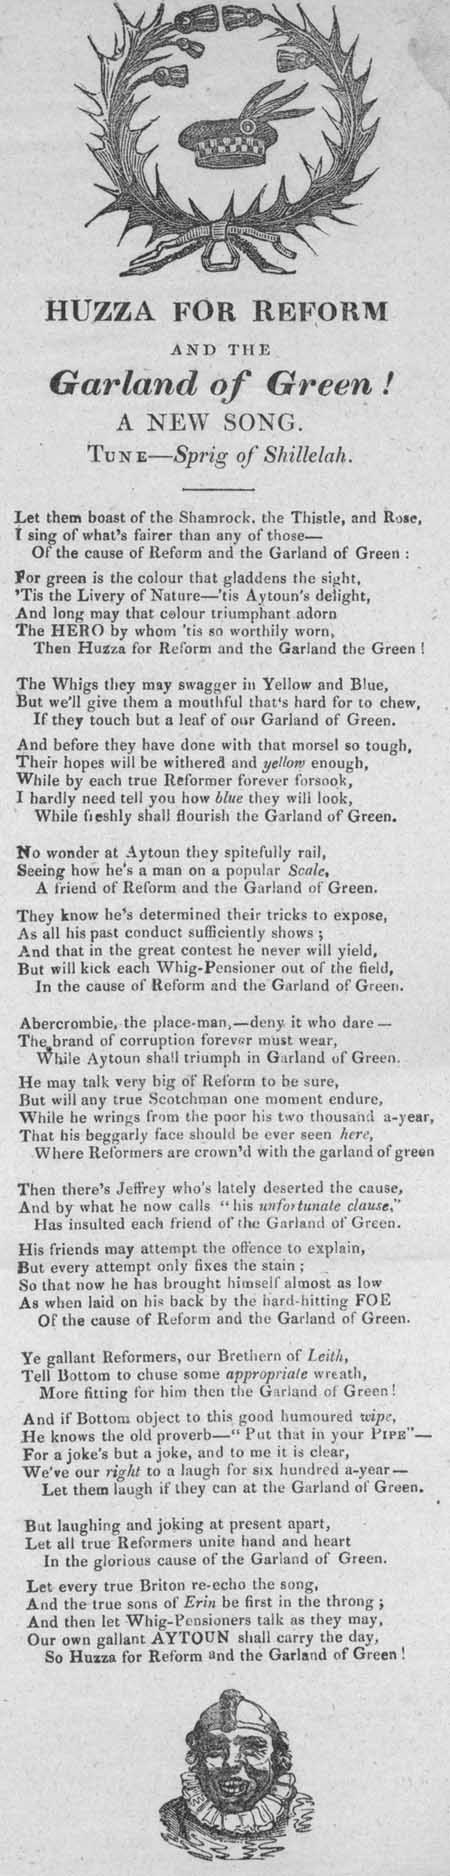 Broadside ballad entitled 'Huzza For Reform and the Garland of Green!'